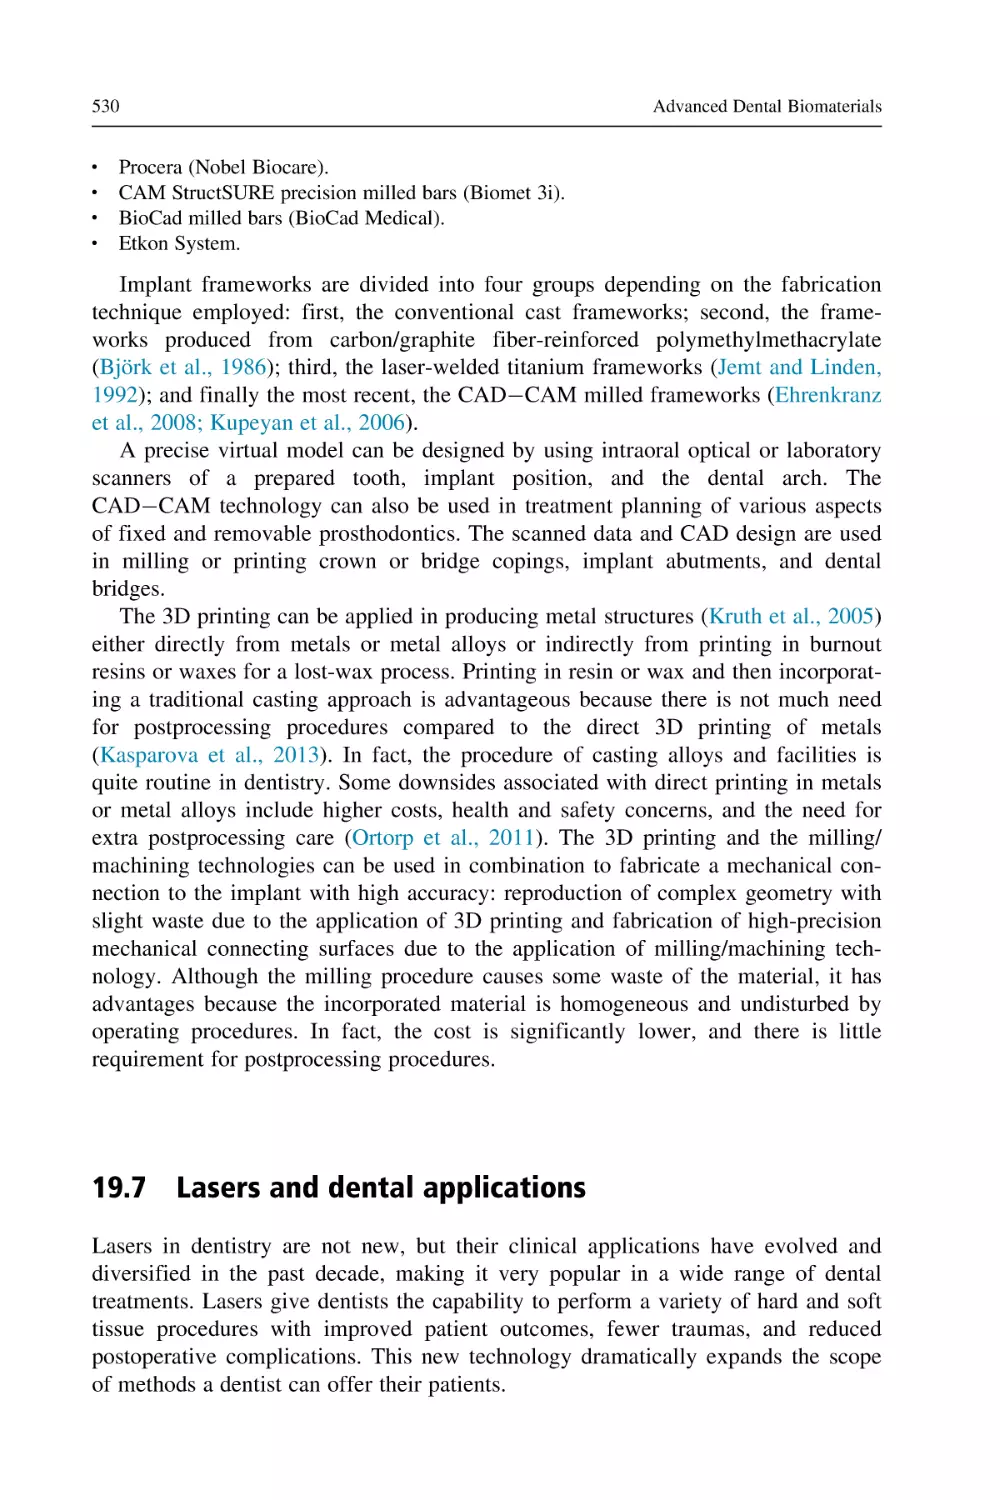 19.7 Lasers and dental applications